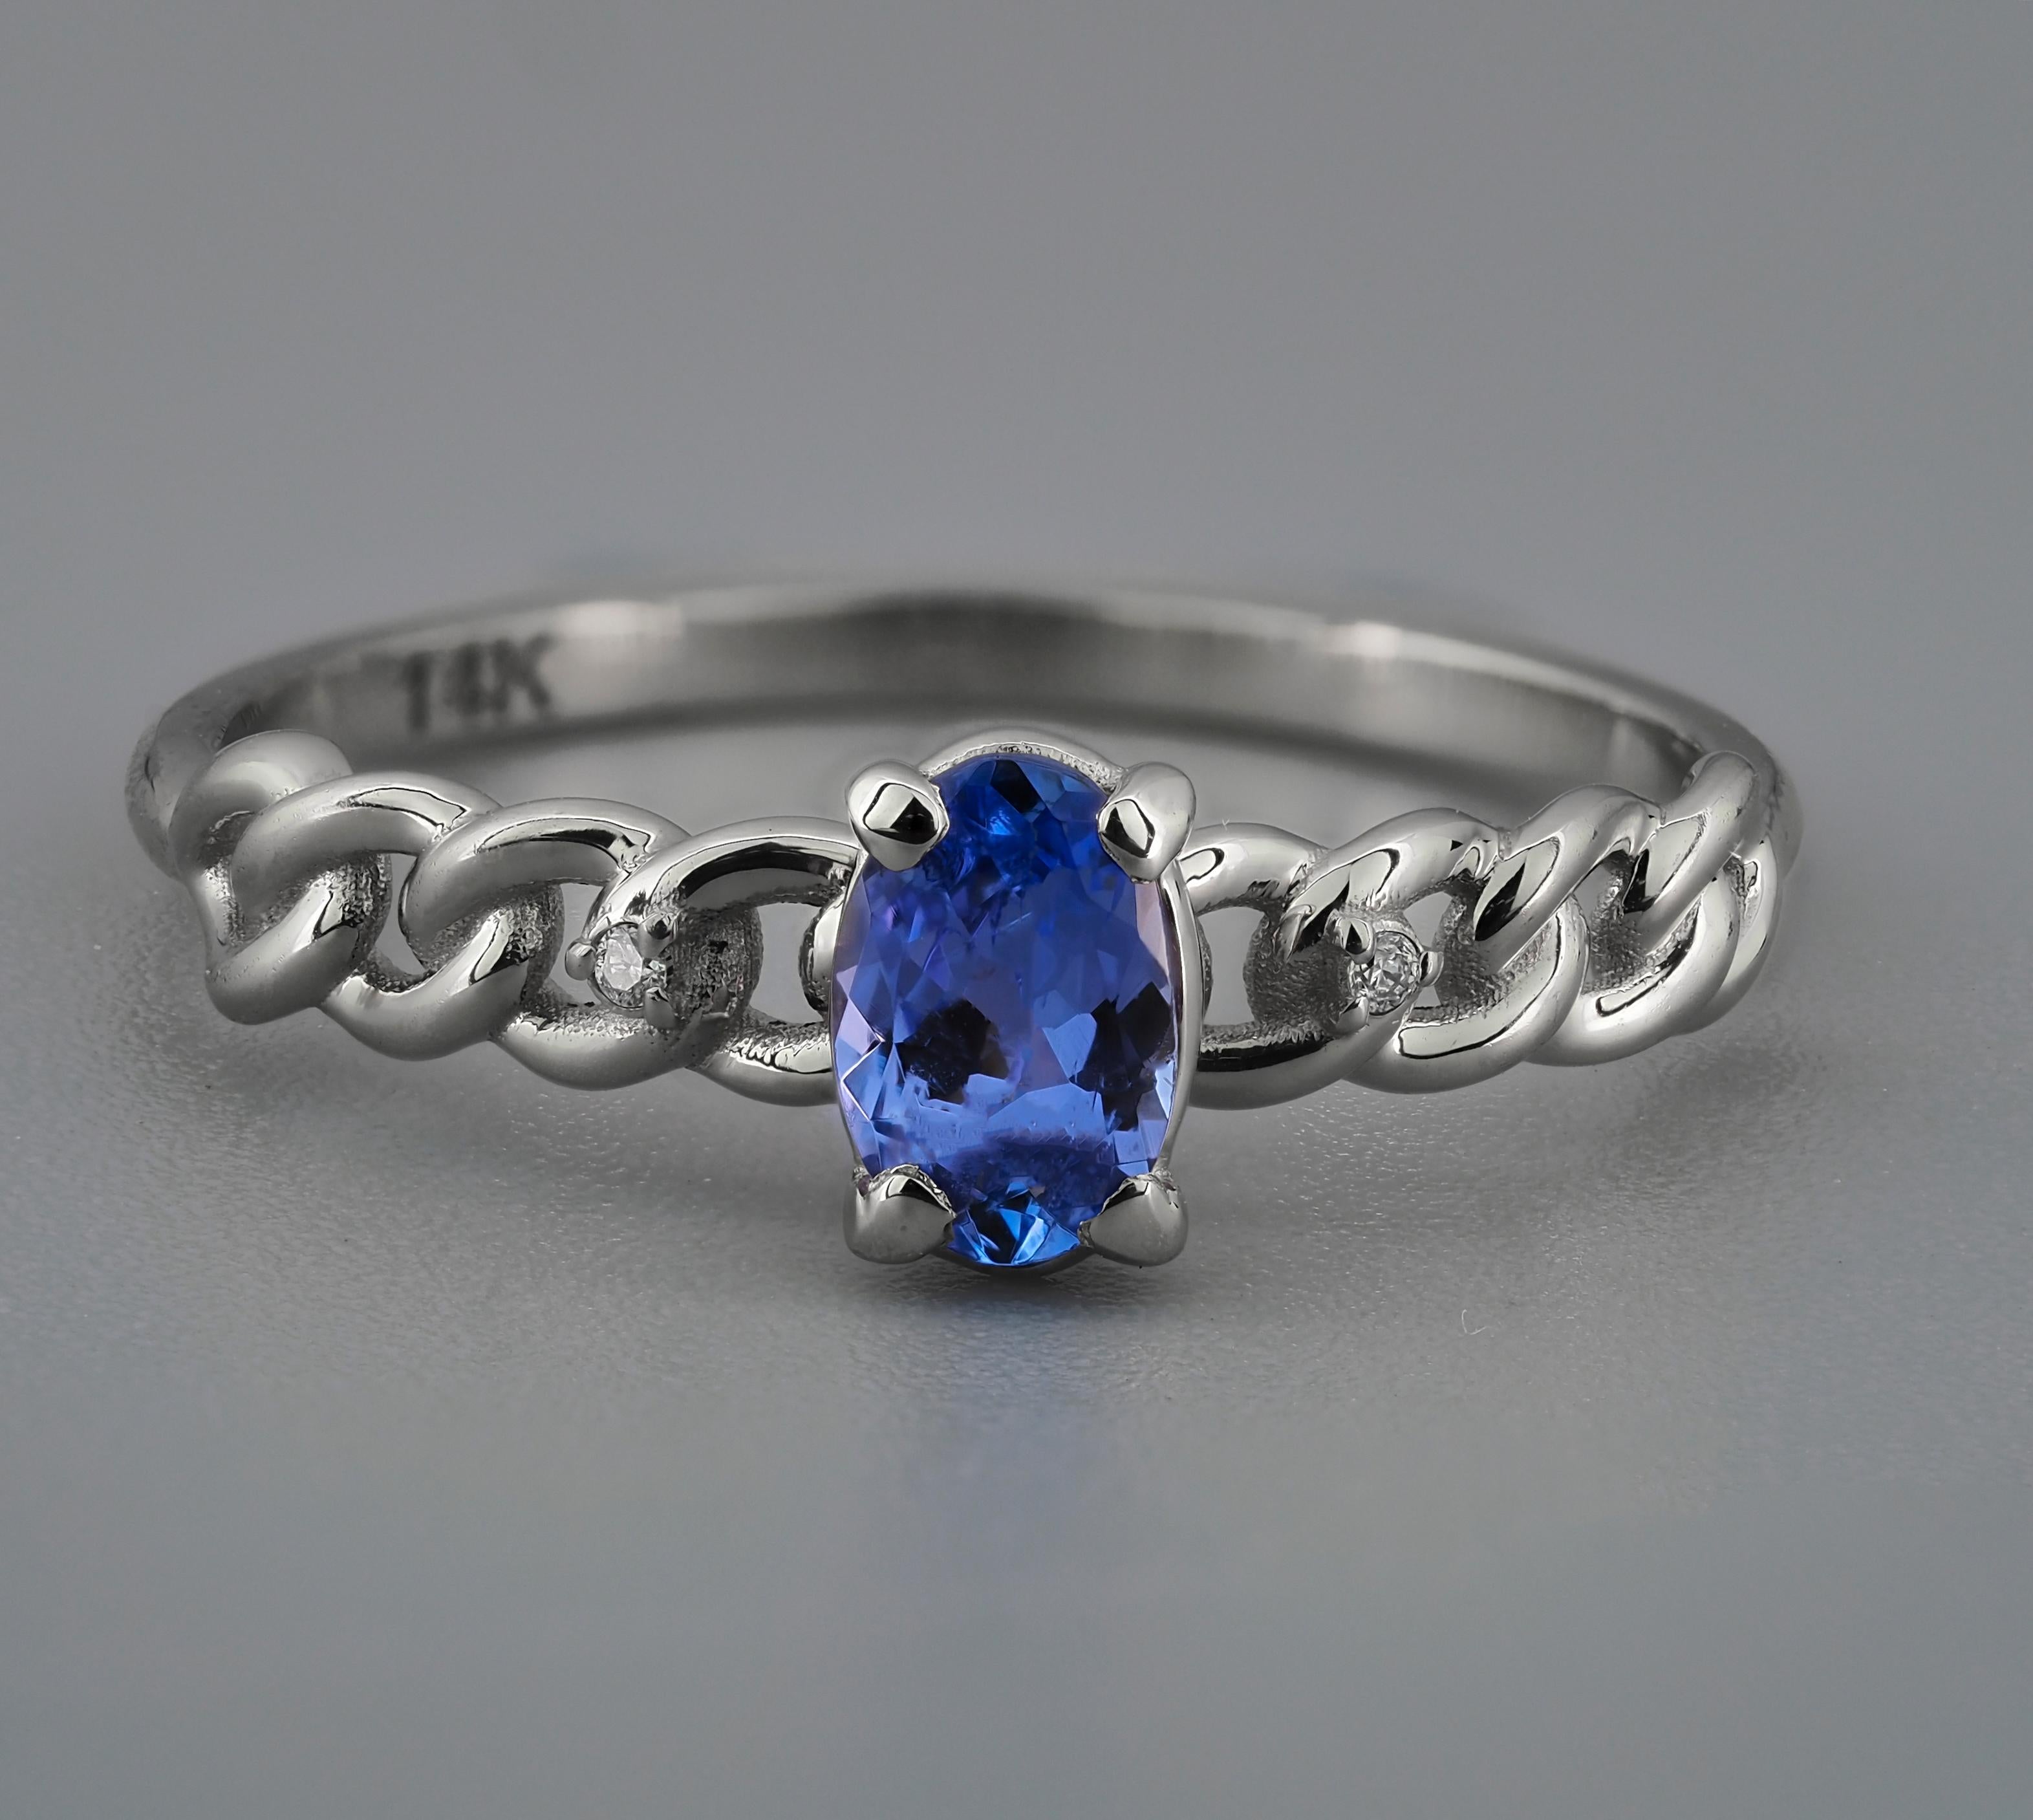 For Sale:  14k Gold Ring with Tanzanite and Diamonds! 3